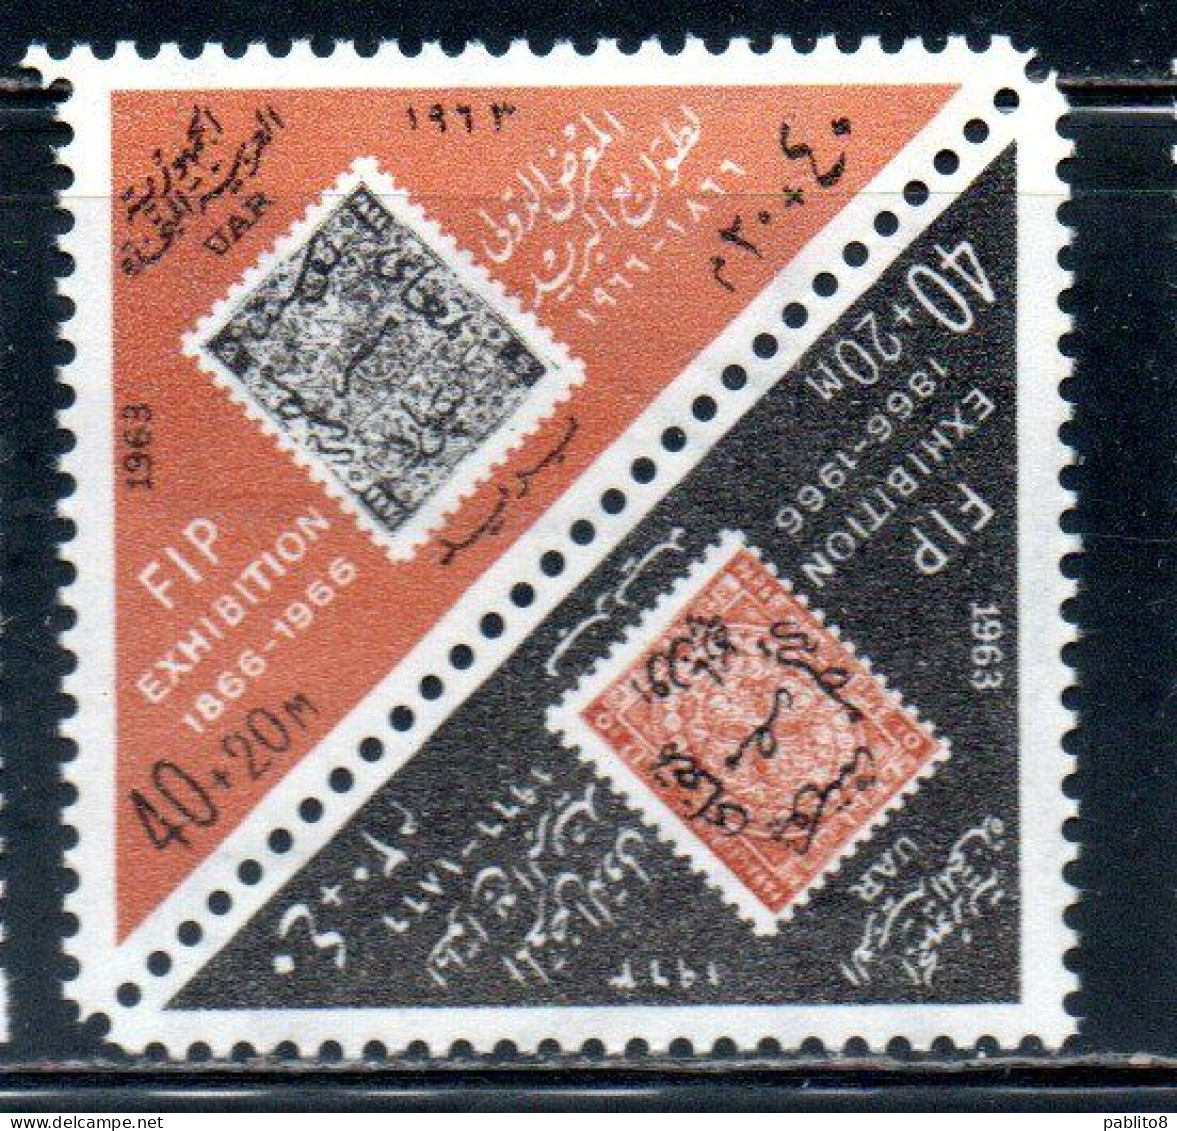 UAR EGYPT EGITTO 1963 POST DAY AND STAMP EXHIBITION 1966 OF THE FIP 40m + 20m MNH - Neufs